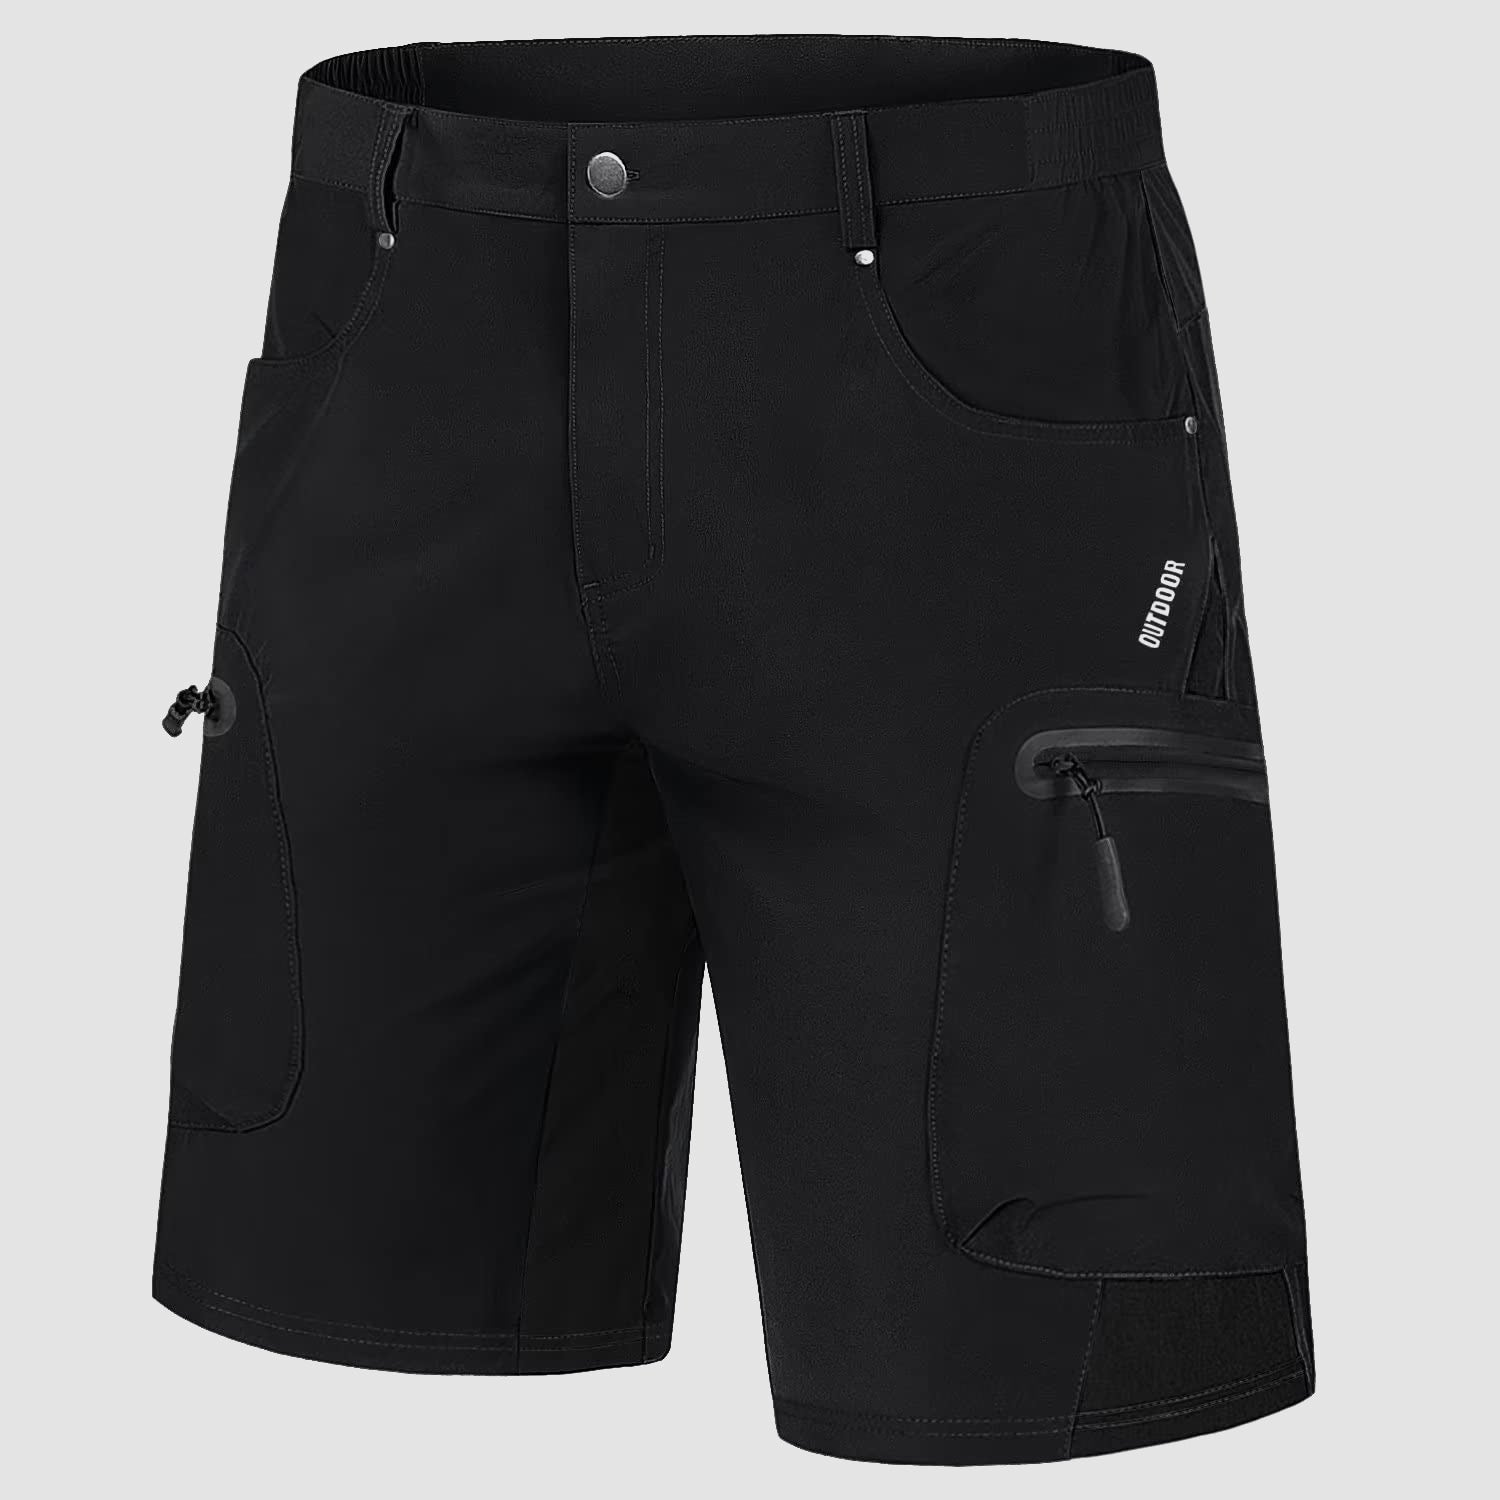 Get 4th Cargo 5 Shorts with MAGCOMSEN Pockets the Ripstop 4 Buy Qui Free！】Men\'s –